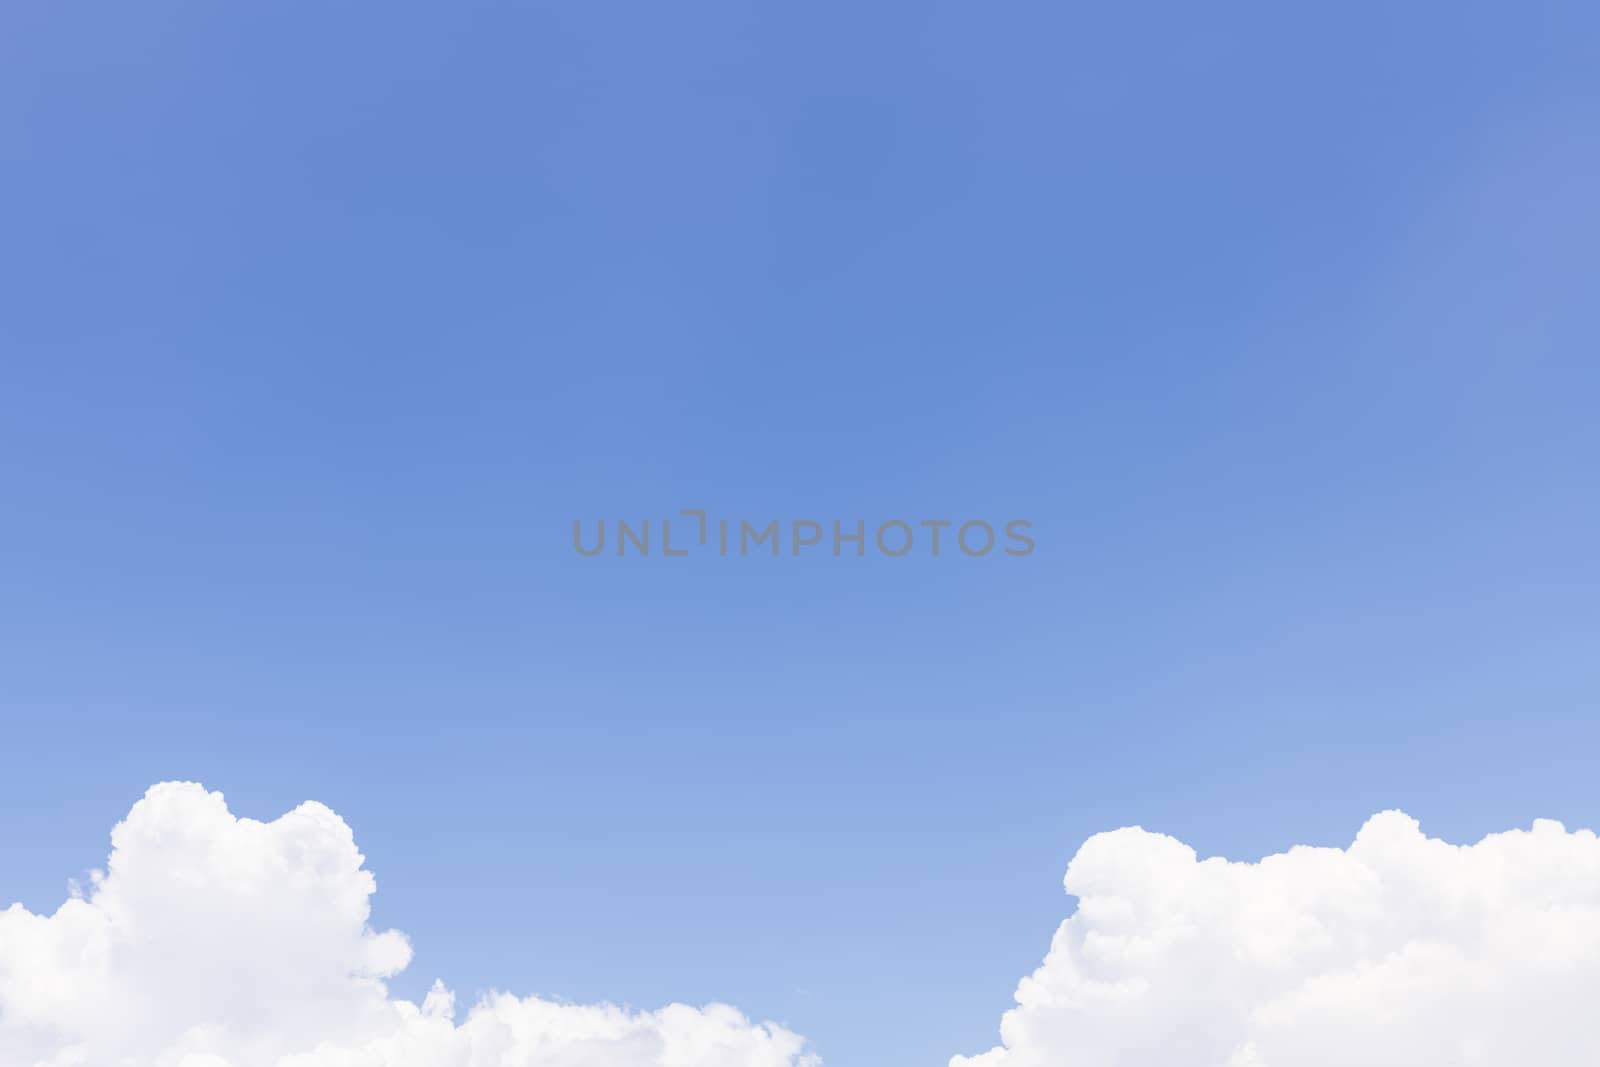 While Clouds over Blue Sky Background by viscorp